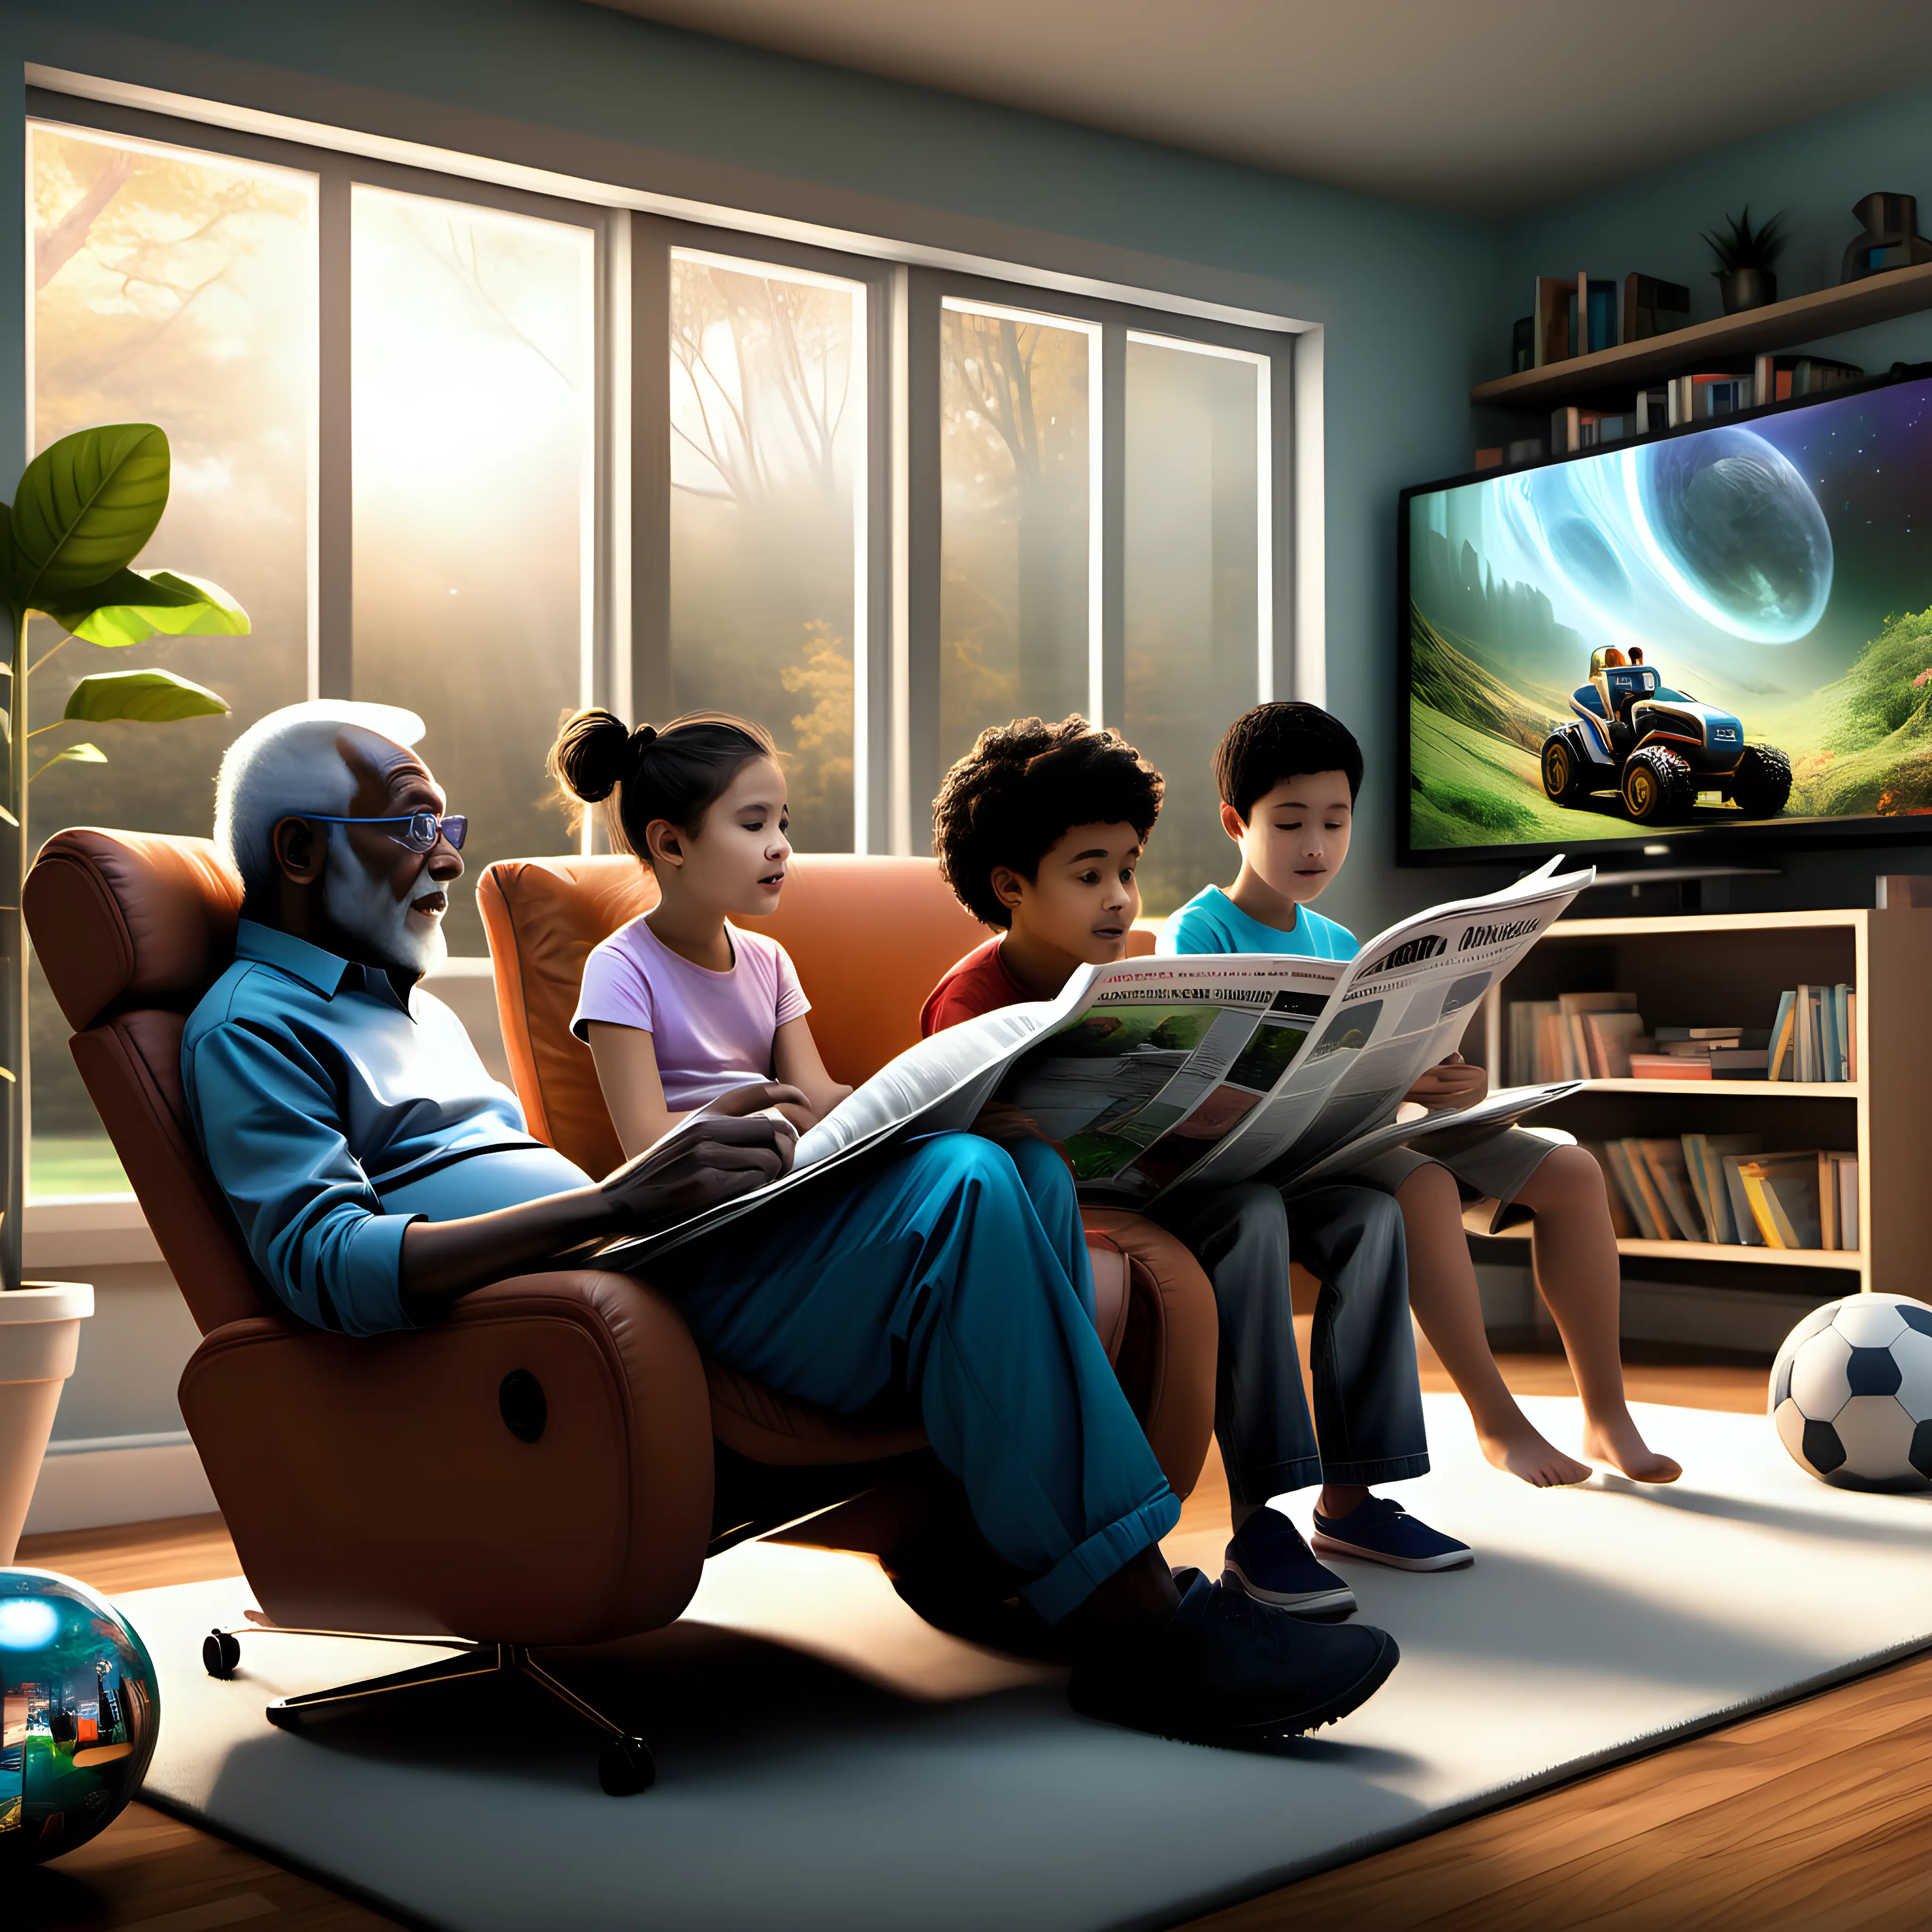 Multicultural Family Harmony in a Lifelong Learning Living Room